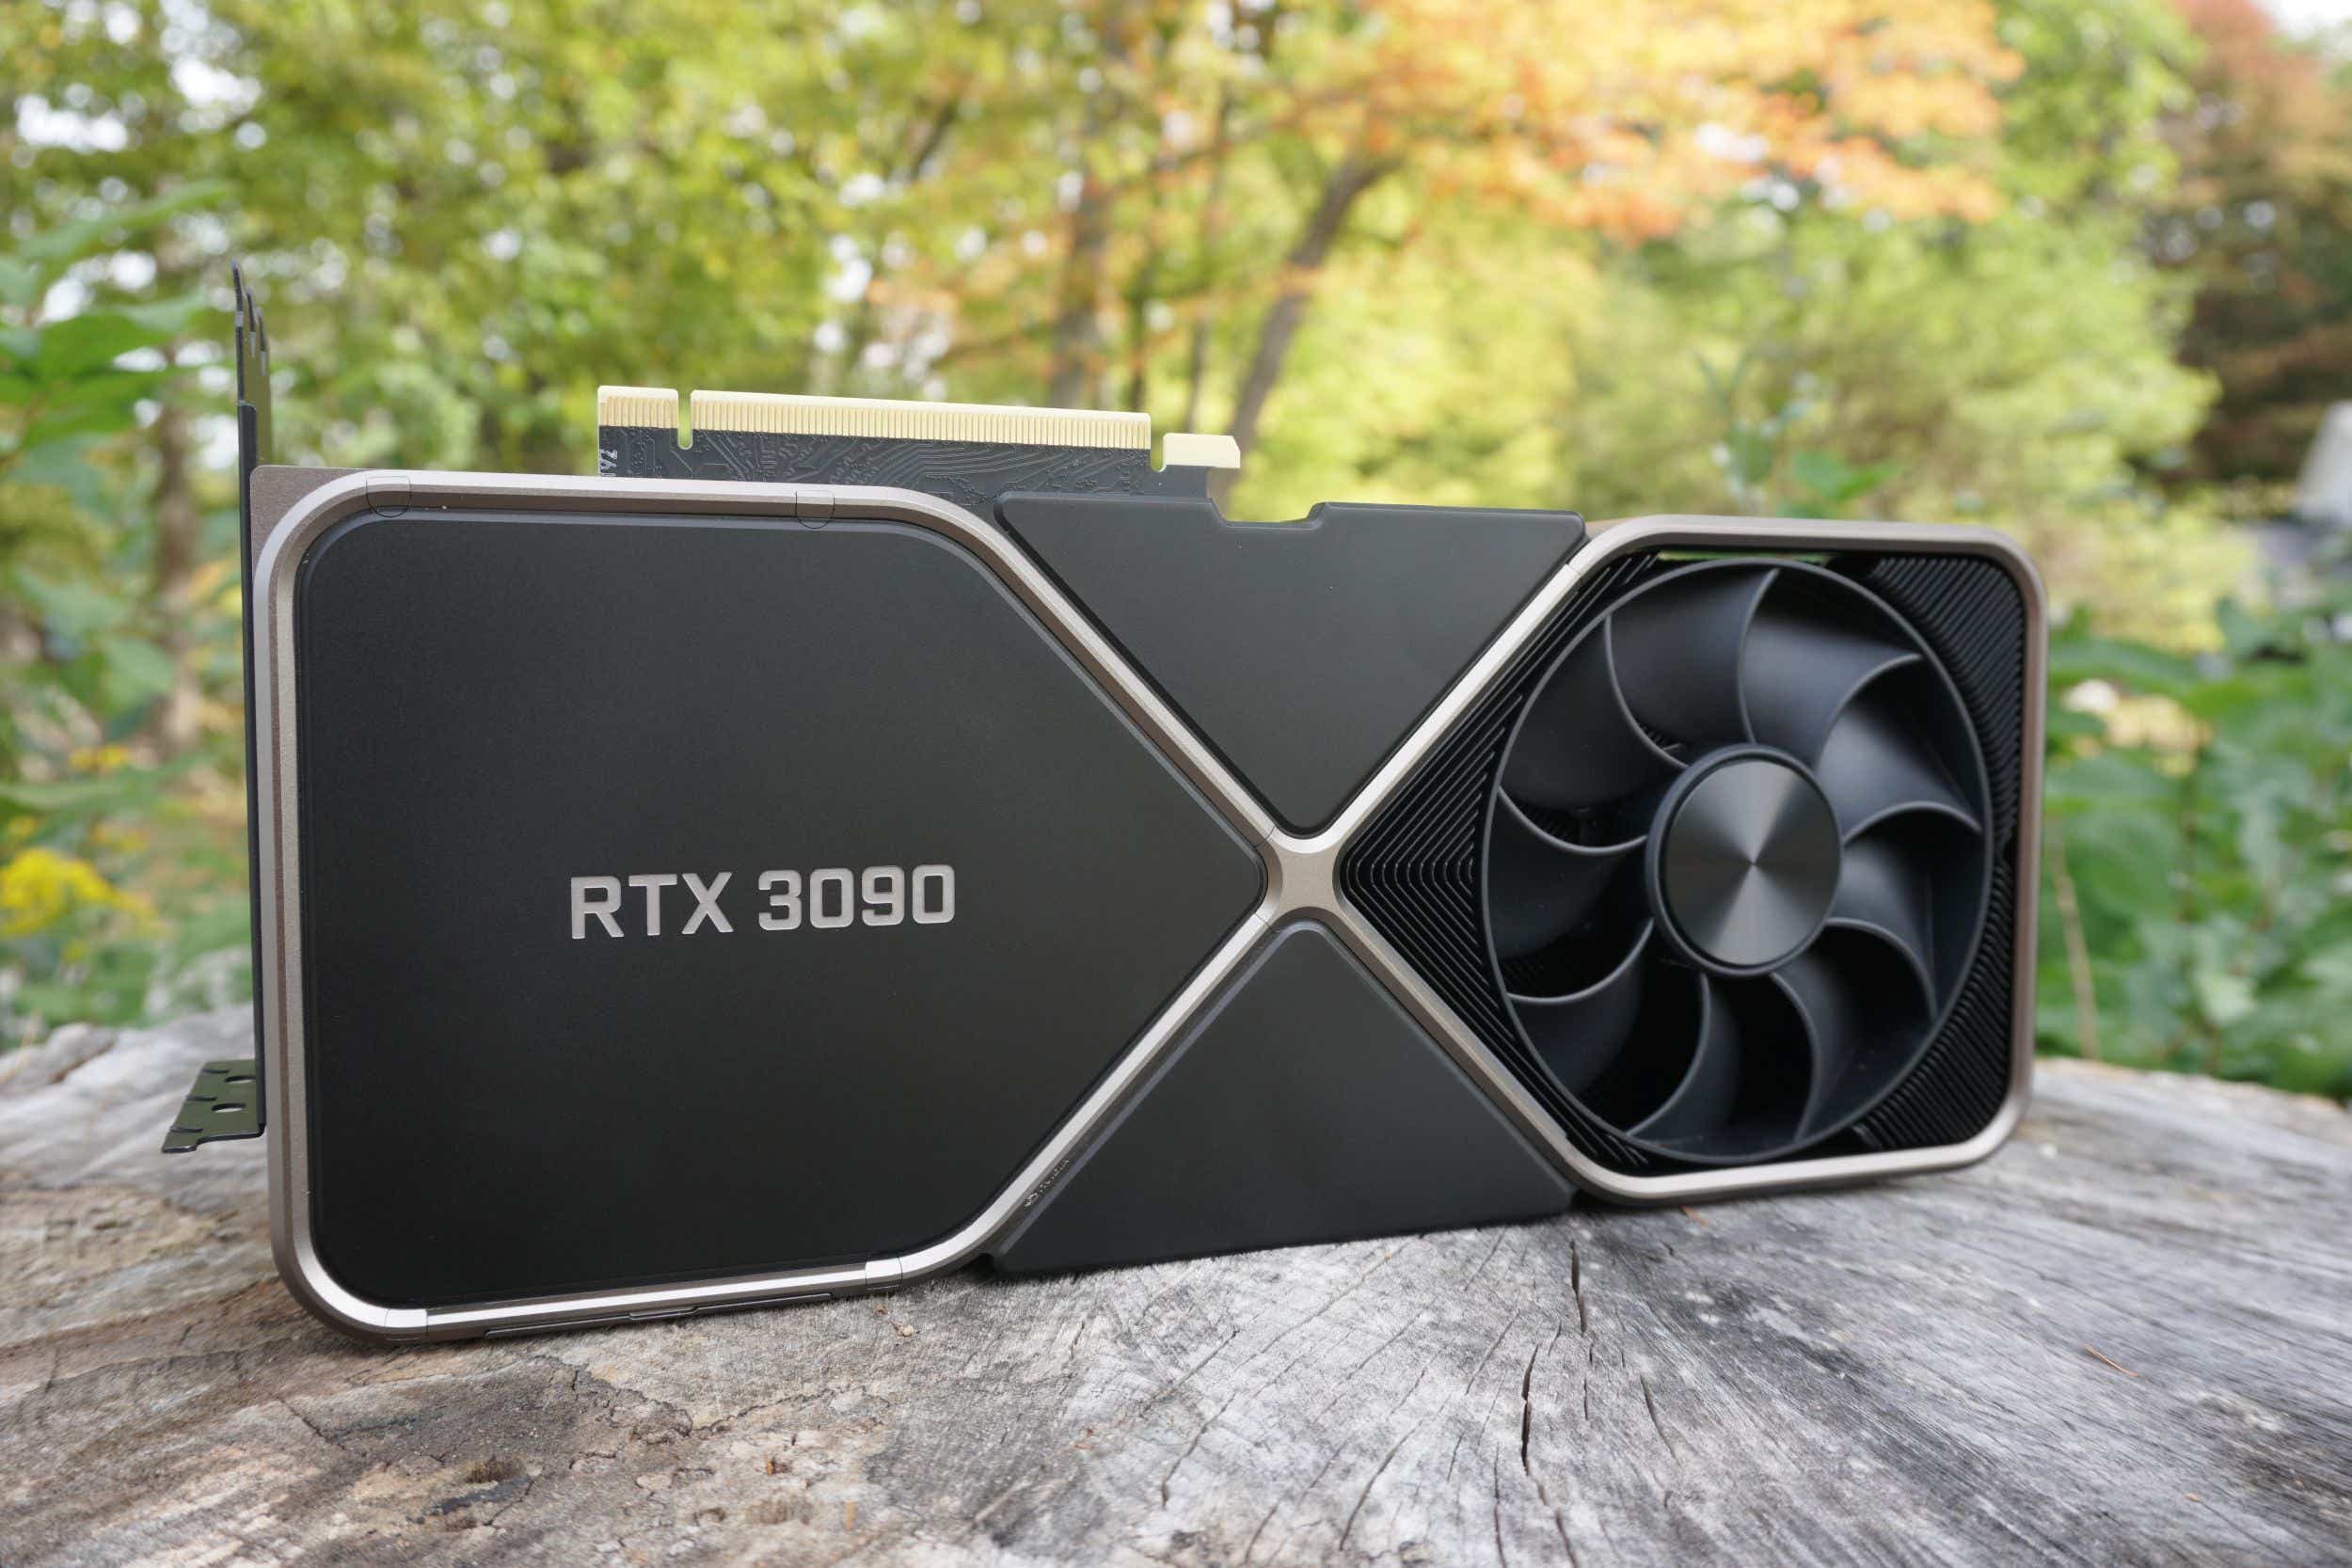 Nvidia GeForce RTX 3090 - Best high-end 4K graphics card for content creation and ray tracing